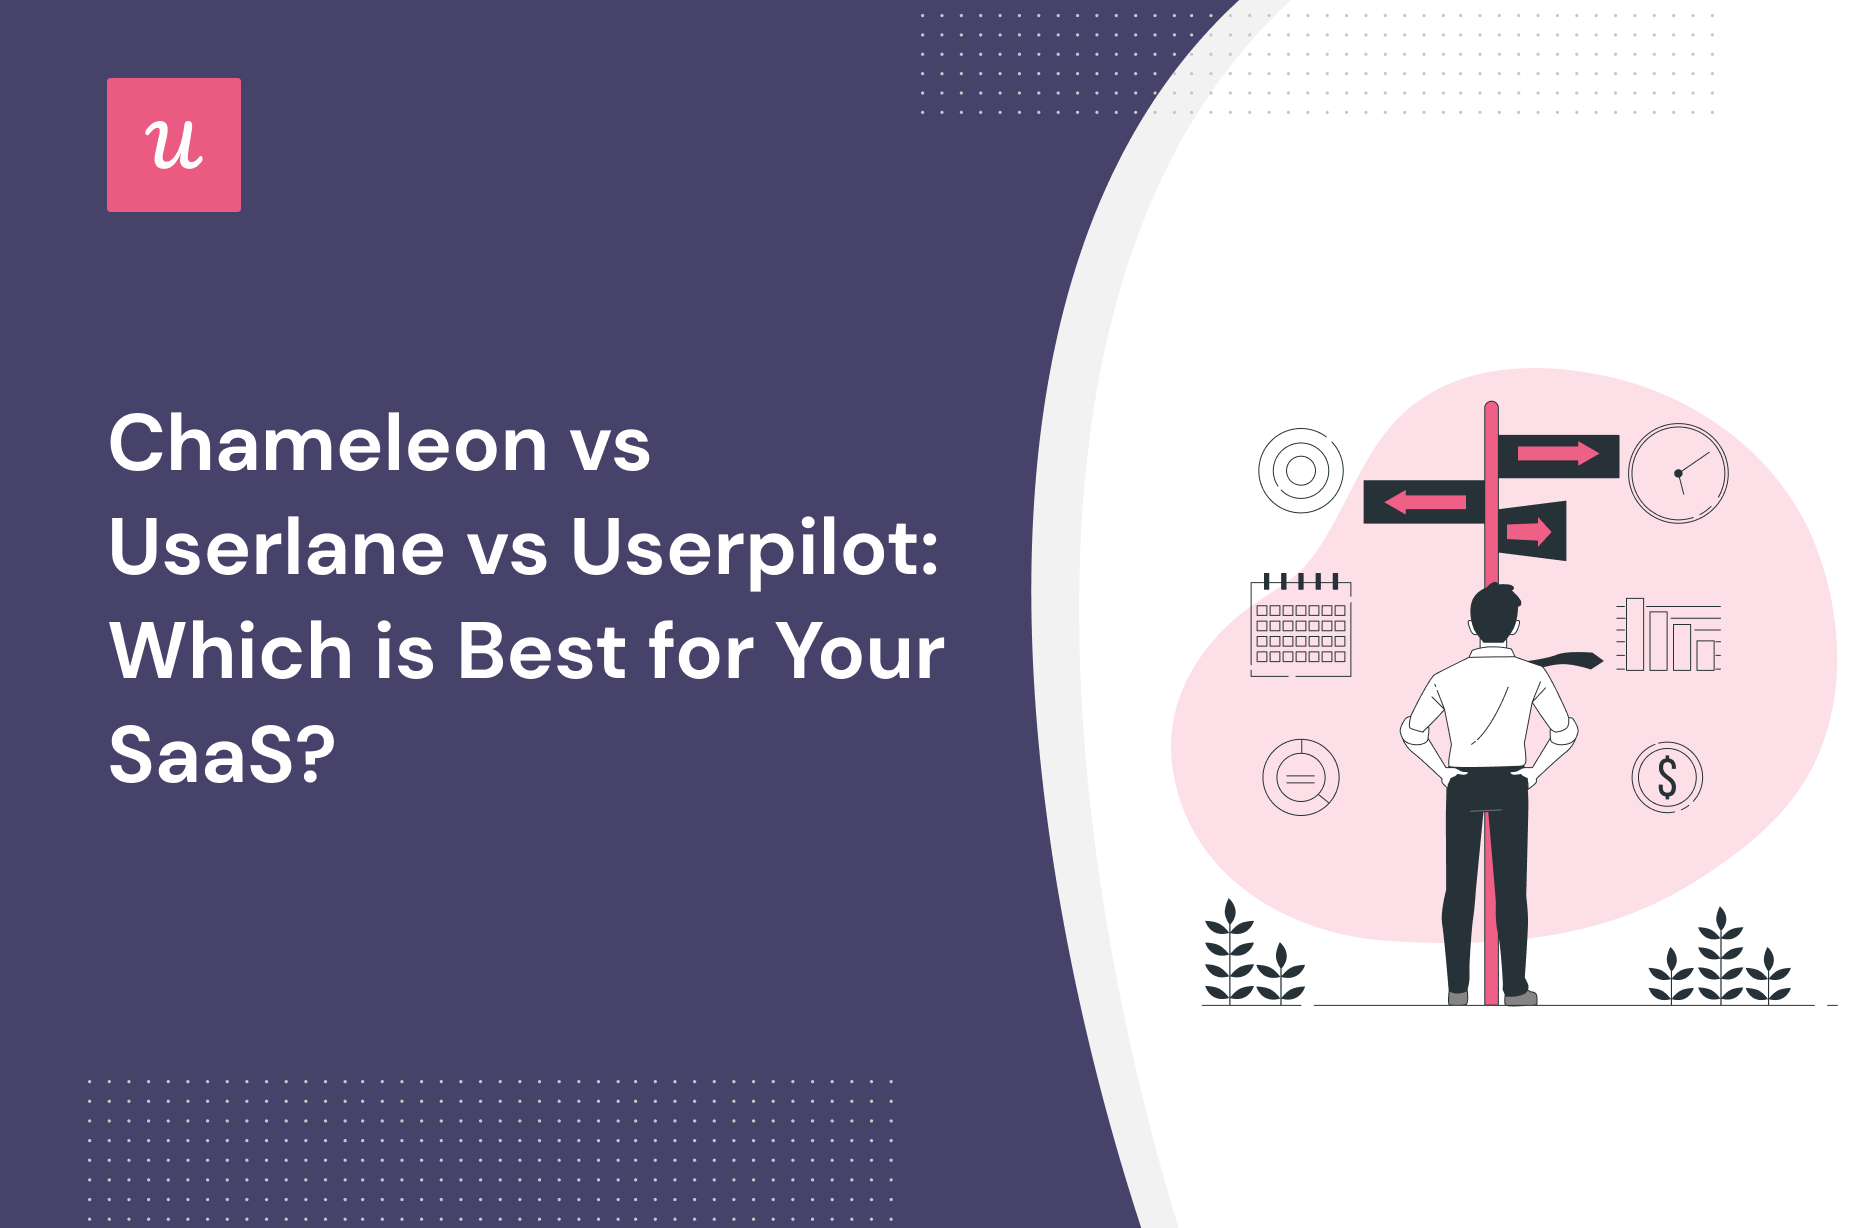 Chameleon vs Userlane vs Userpilot: Which is Best for Your SaaS?